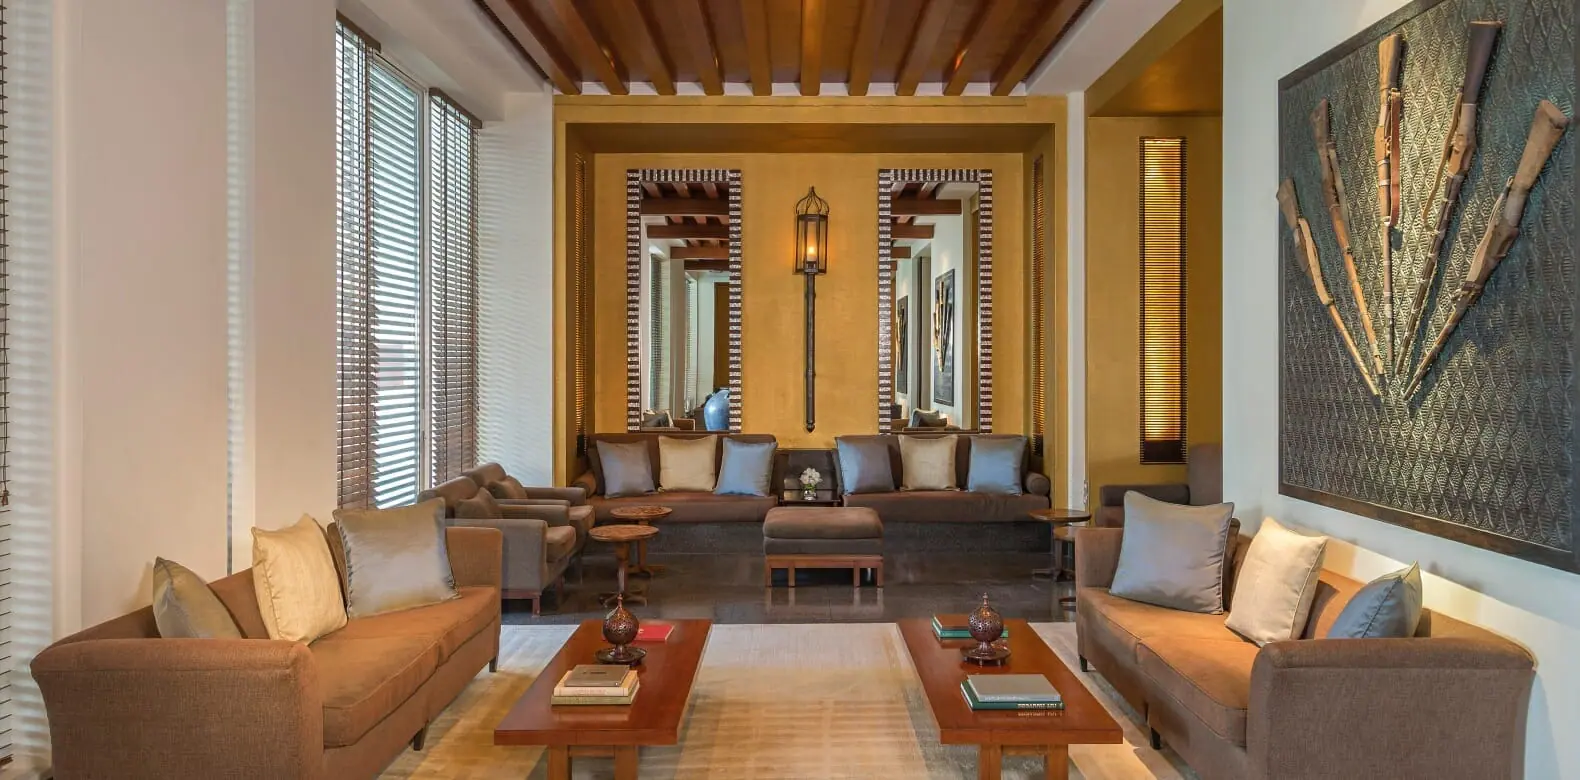 The Chedi Muscat - Lobby Lounge